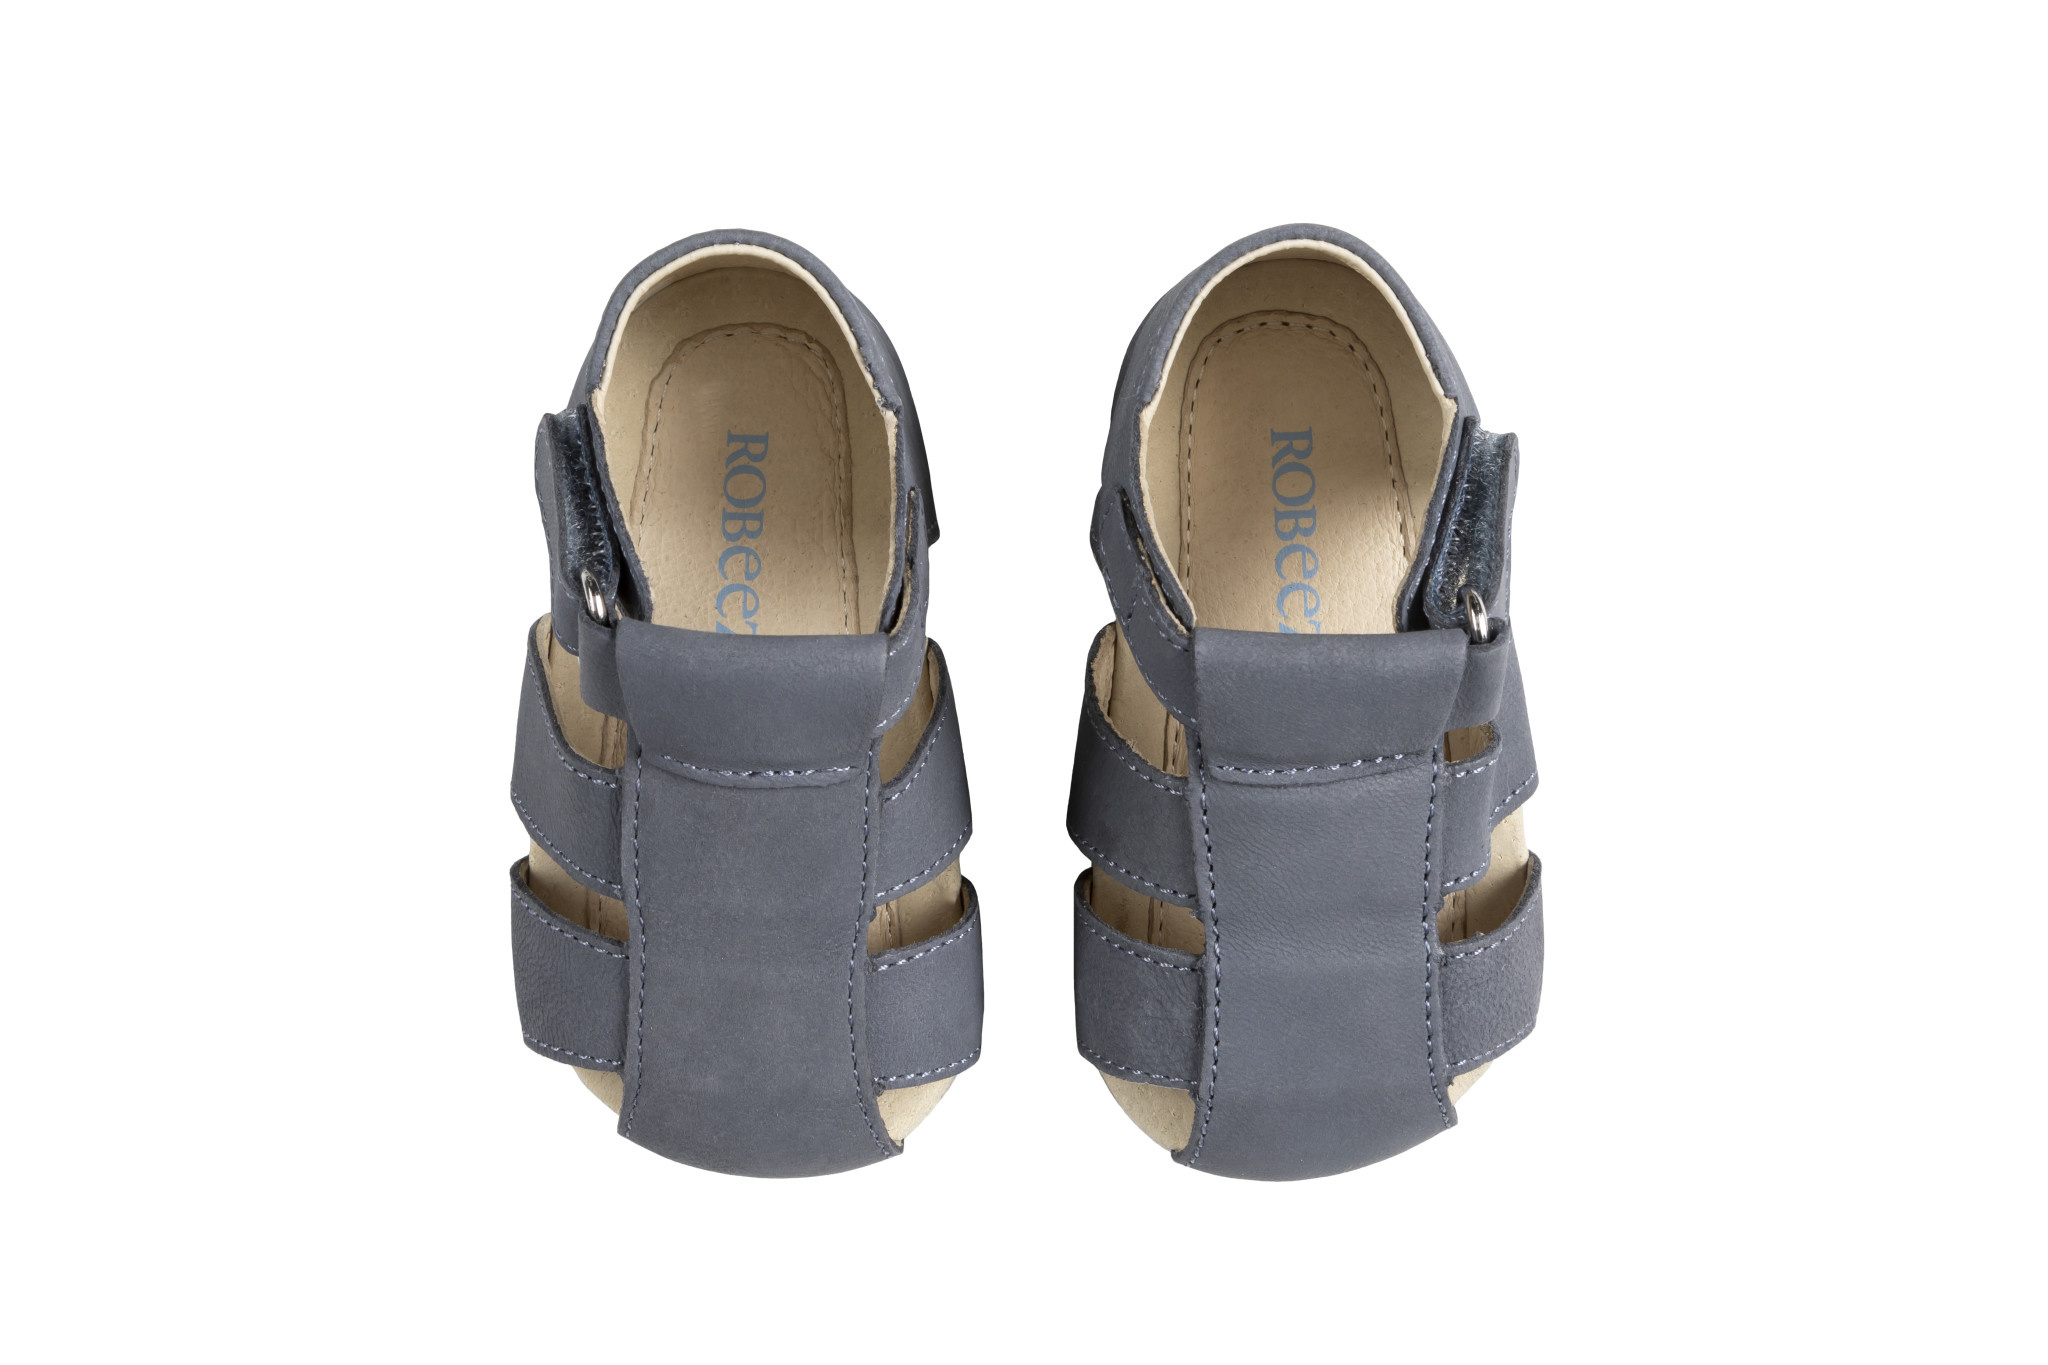 Robeez Boy's Soft Soled Shoes